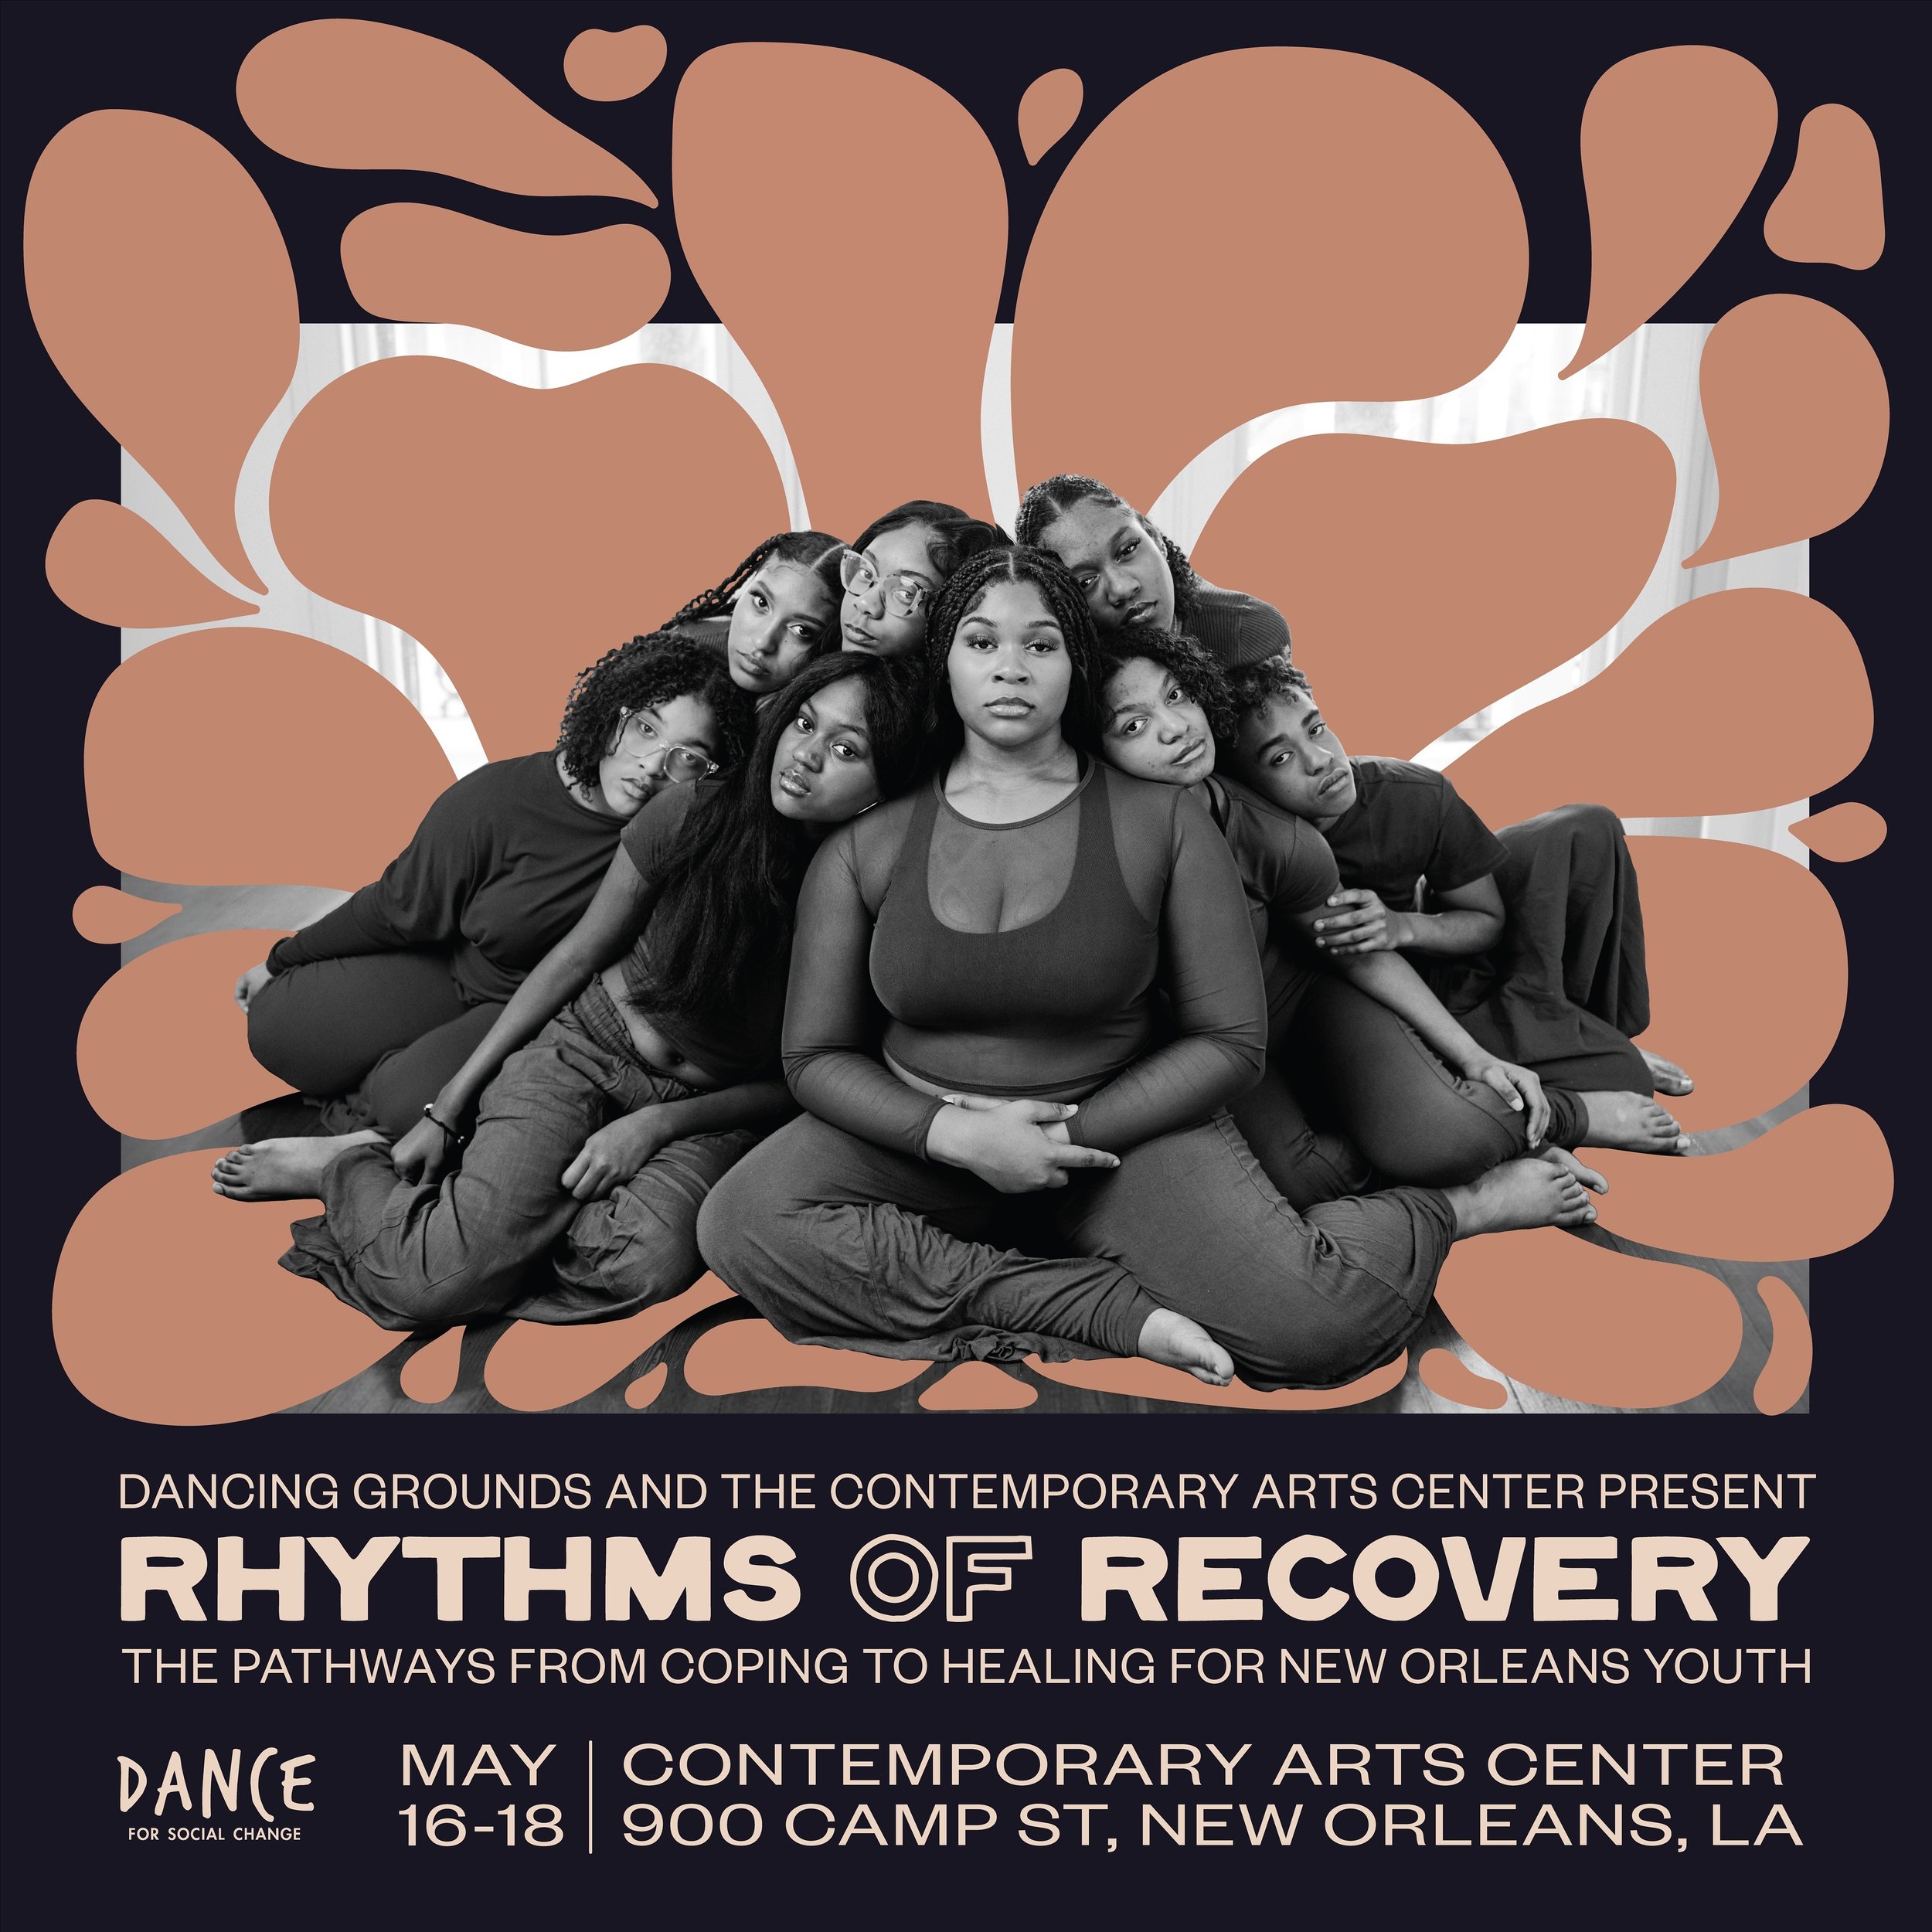 Are you ready to #DanceForSocialChange? Join us May 16-18 for Rhythms of Recovery: The pathways from coping to healing for New Orleans youth, a three-day event that serves as the culmination of the DSC Teen Company&rsquo;s year of analyzing how viole